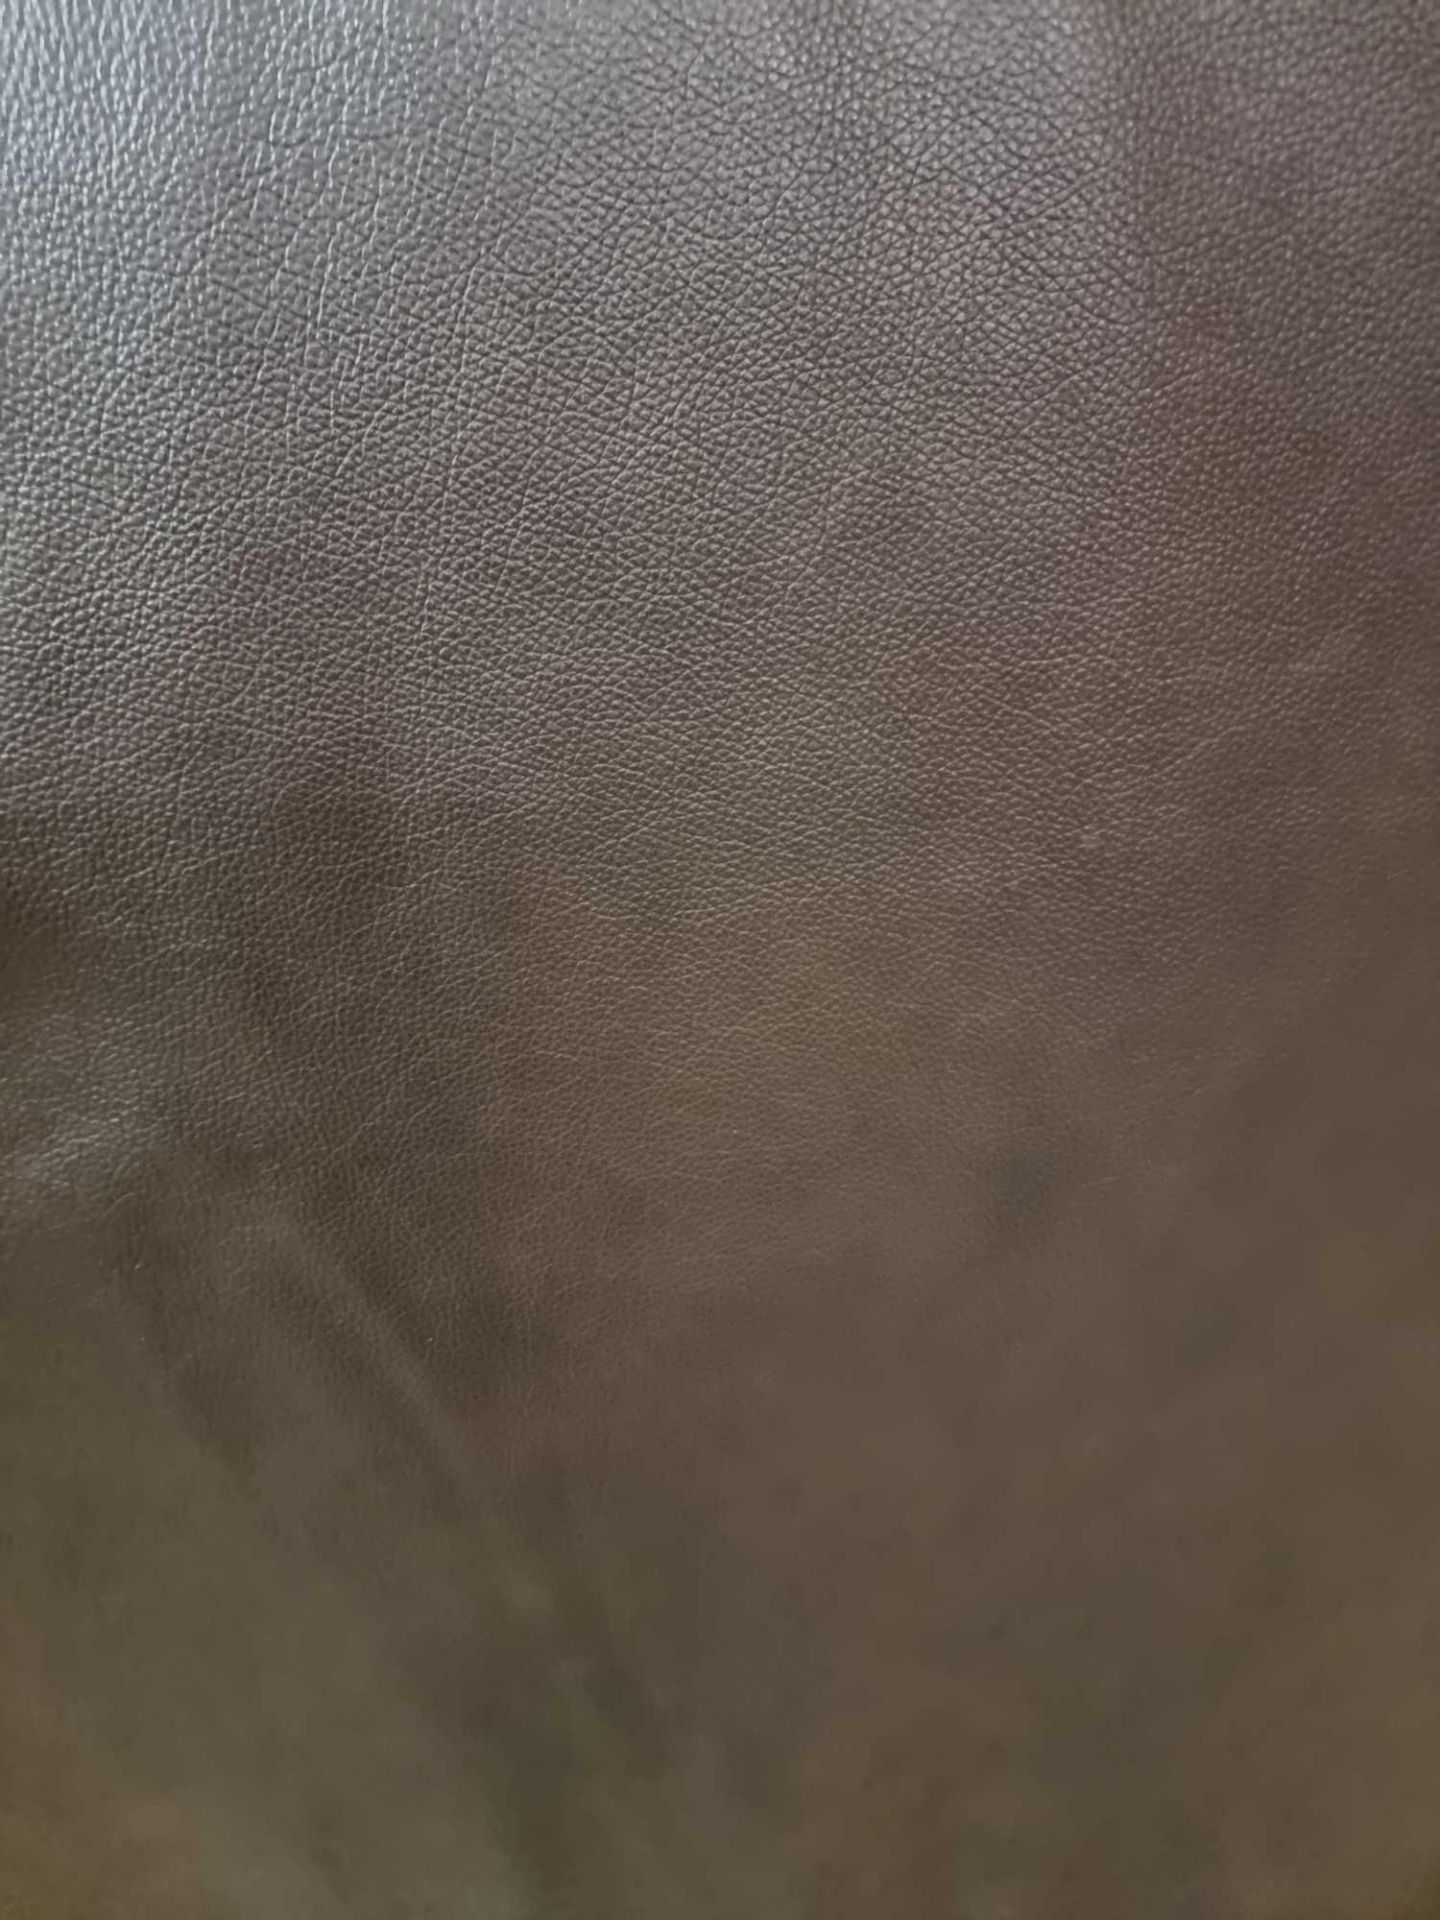 Mastrotto Hudson Chocolate Leather Hide approximately 5M2 2 5 x 2cm ( Hide No,70) - Image 2 of 3